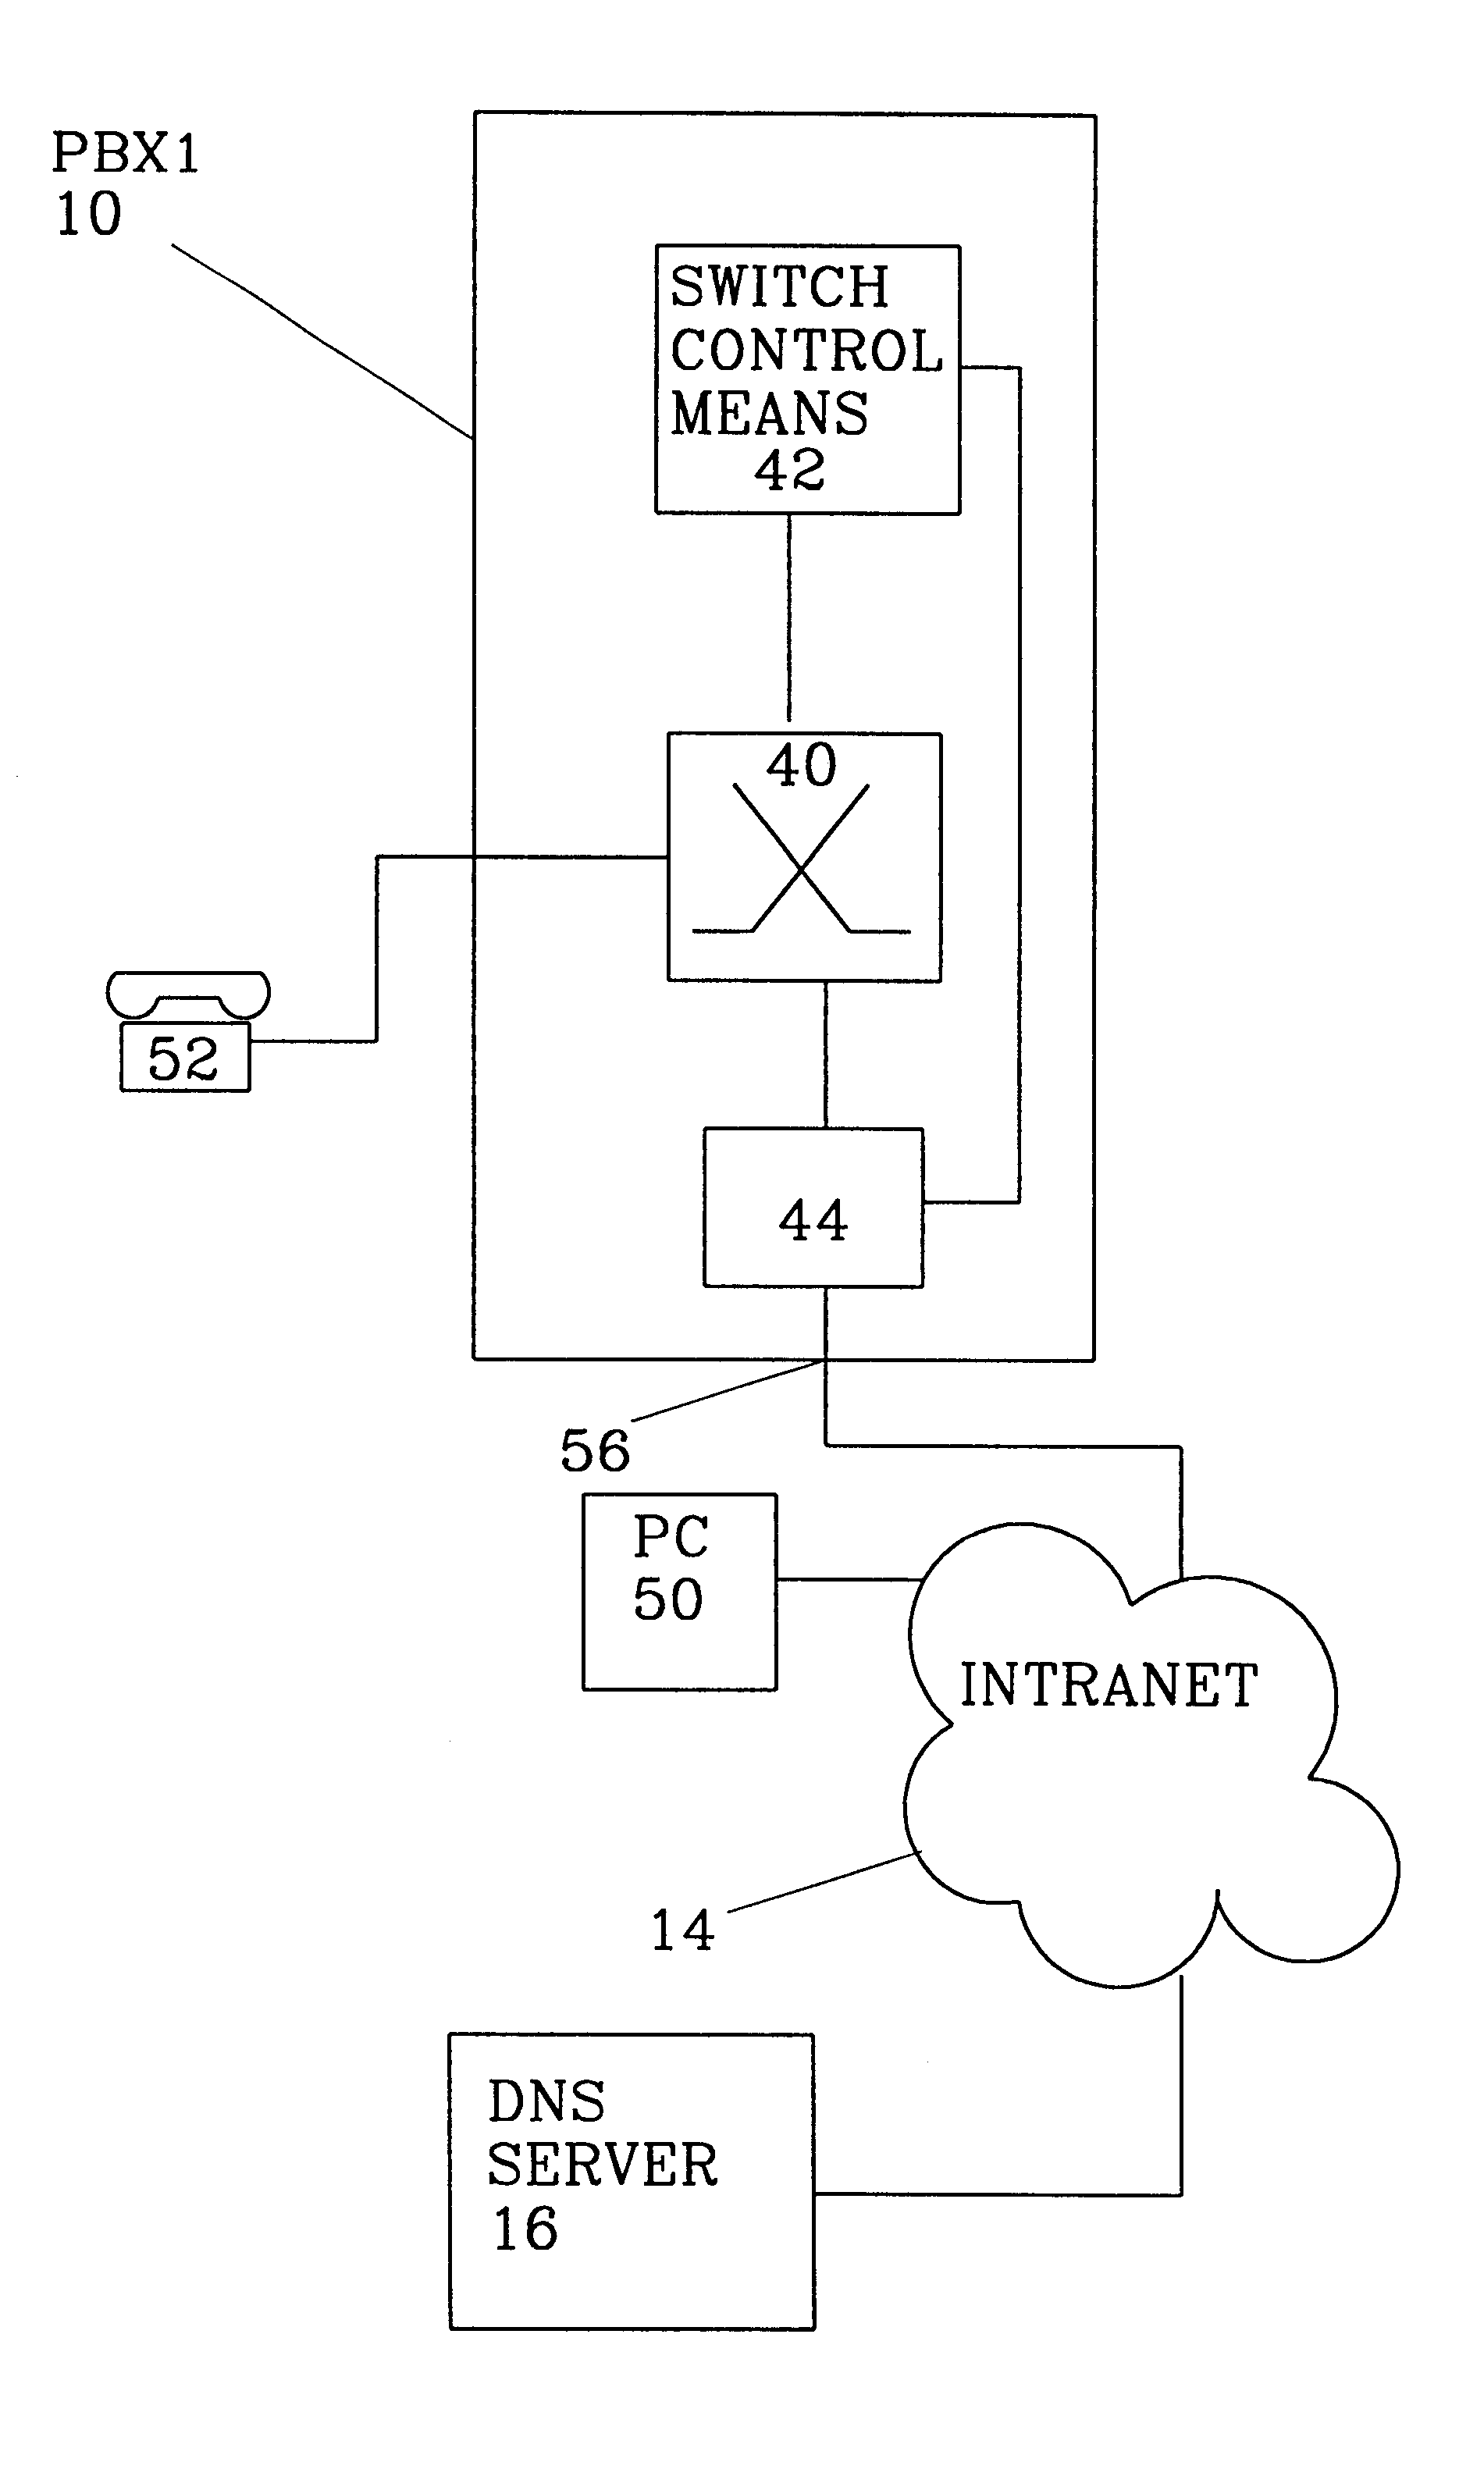 Connection of a computer to a telephone exchange